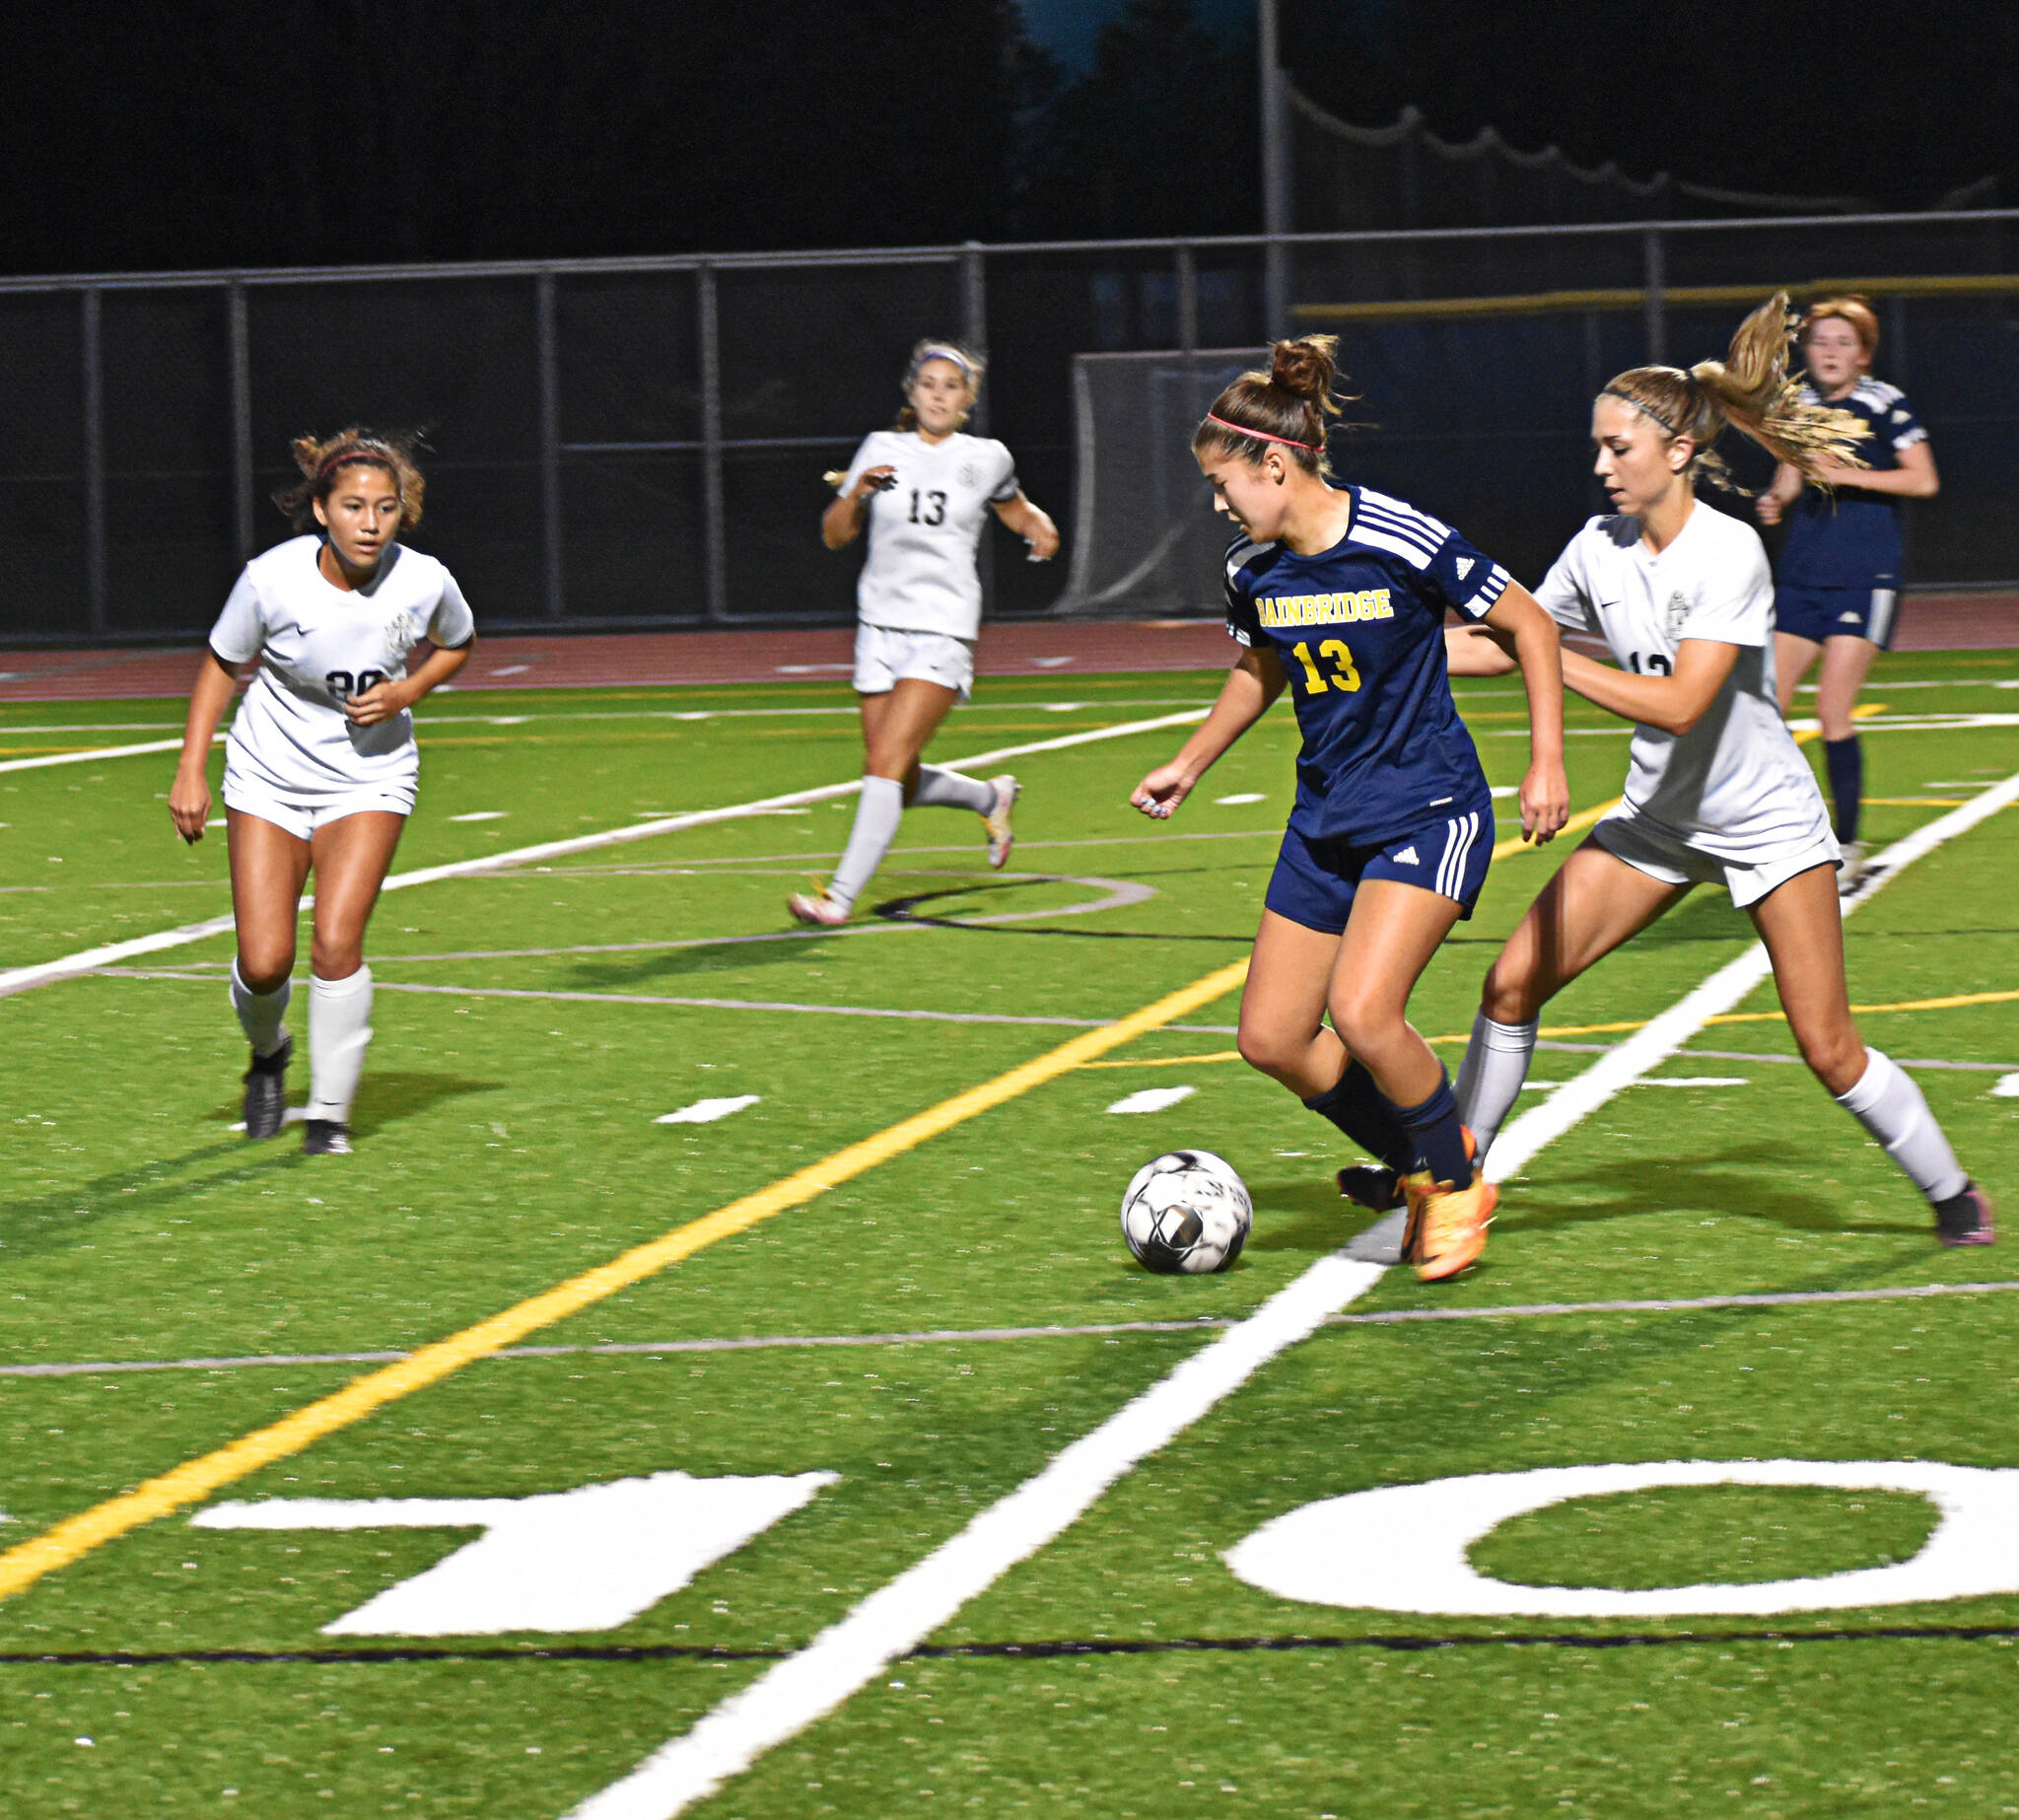 Bainbridge’s Hailey Fink pushes the ball to the attacking zone.